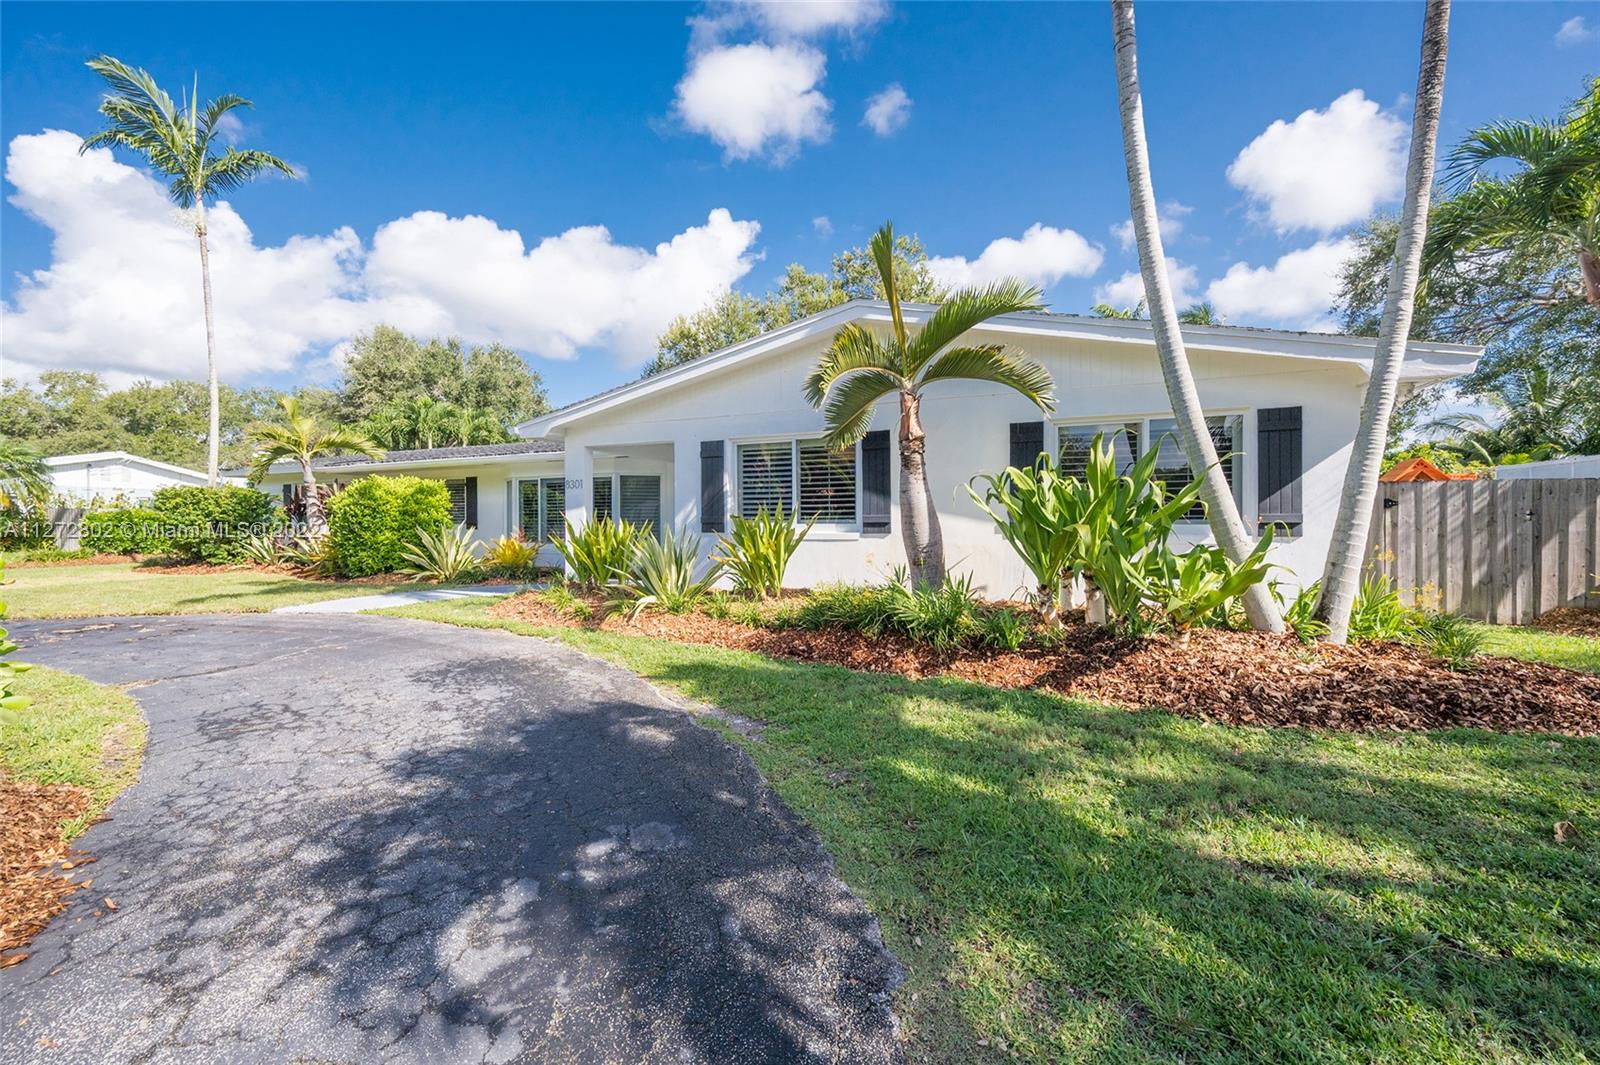 Beautifully updated 4 bedroom and 2 bath home with bonus TV/playroom/den and half bath, full 2 car garage with built in closet with A/C, 3,325 actual area sq. ft. home on a 15,100 sq. ft. lot in the prestigious village of Palmetto Bay near top rated private and public schools.  This recently remodeled home (2018/2019) located on a quiet street has brand new floors throughout, impact windows and doors, brand new wood kitchen cabinets with stainless steel appliances and quartz countertops and updated baths.  Master bedroom has wood floors with custom built closet and in suite bath that opens up to the patio area.  Plumbing was updated in 2016 to PVC (no cast iron).  Oversized fenced backyard with plenty of room to park a boat has working sprinklers, a covered patio and chlorine pool.